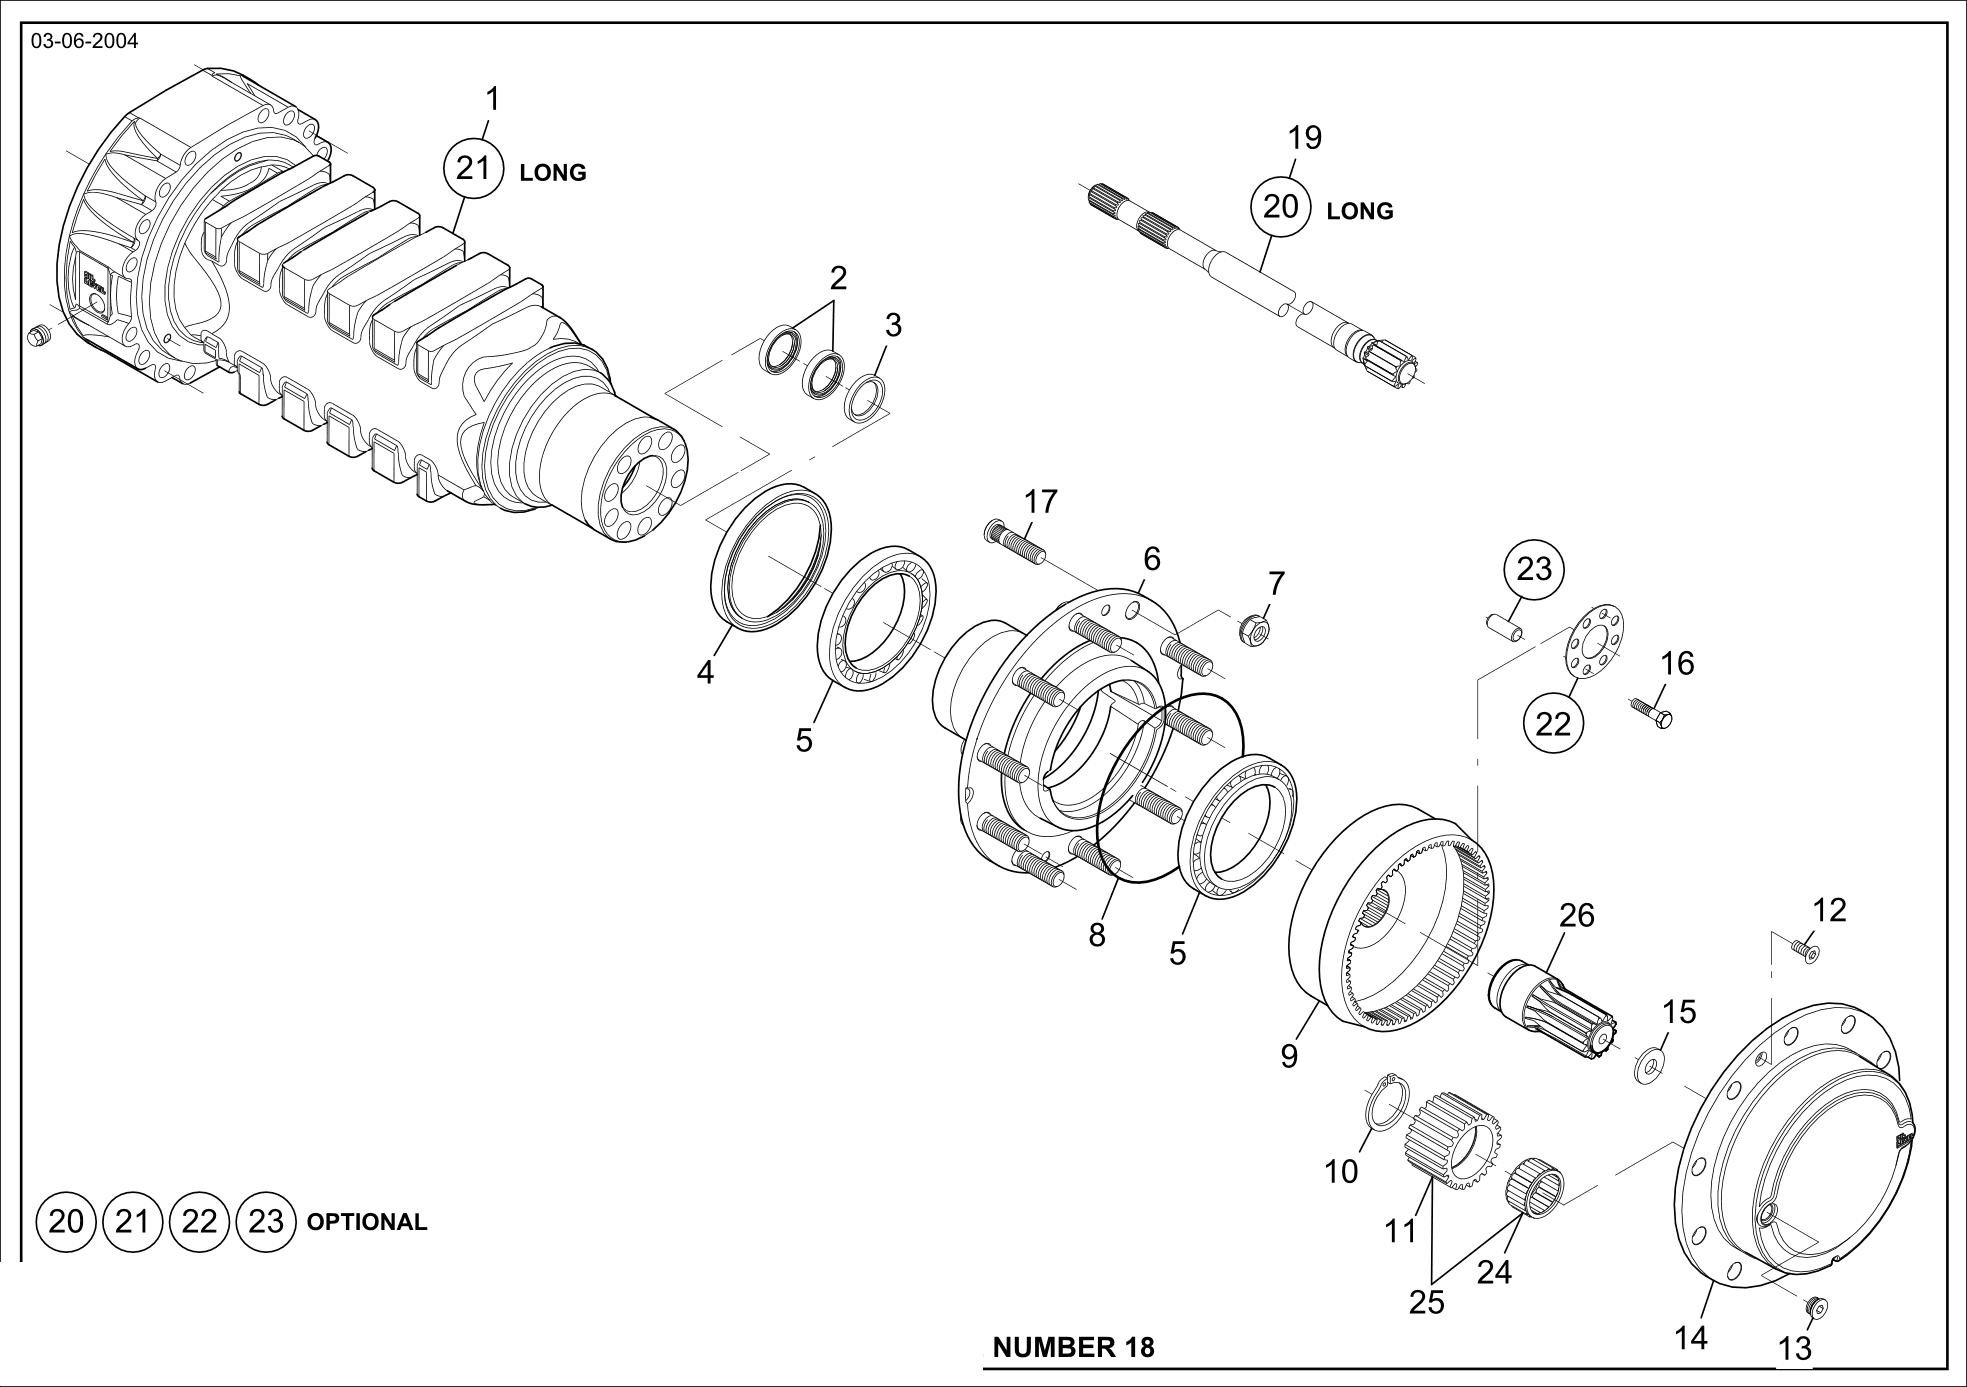 drawing for CNH NEW HOLLAND 75288943 - PLUG (figure 2)